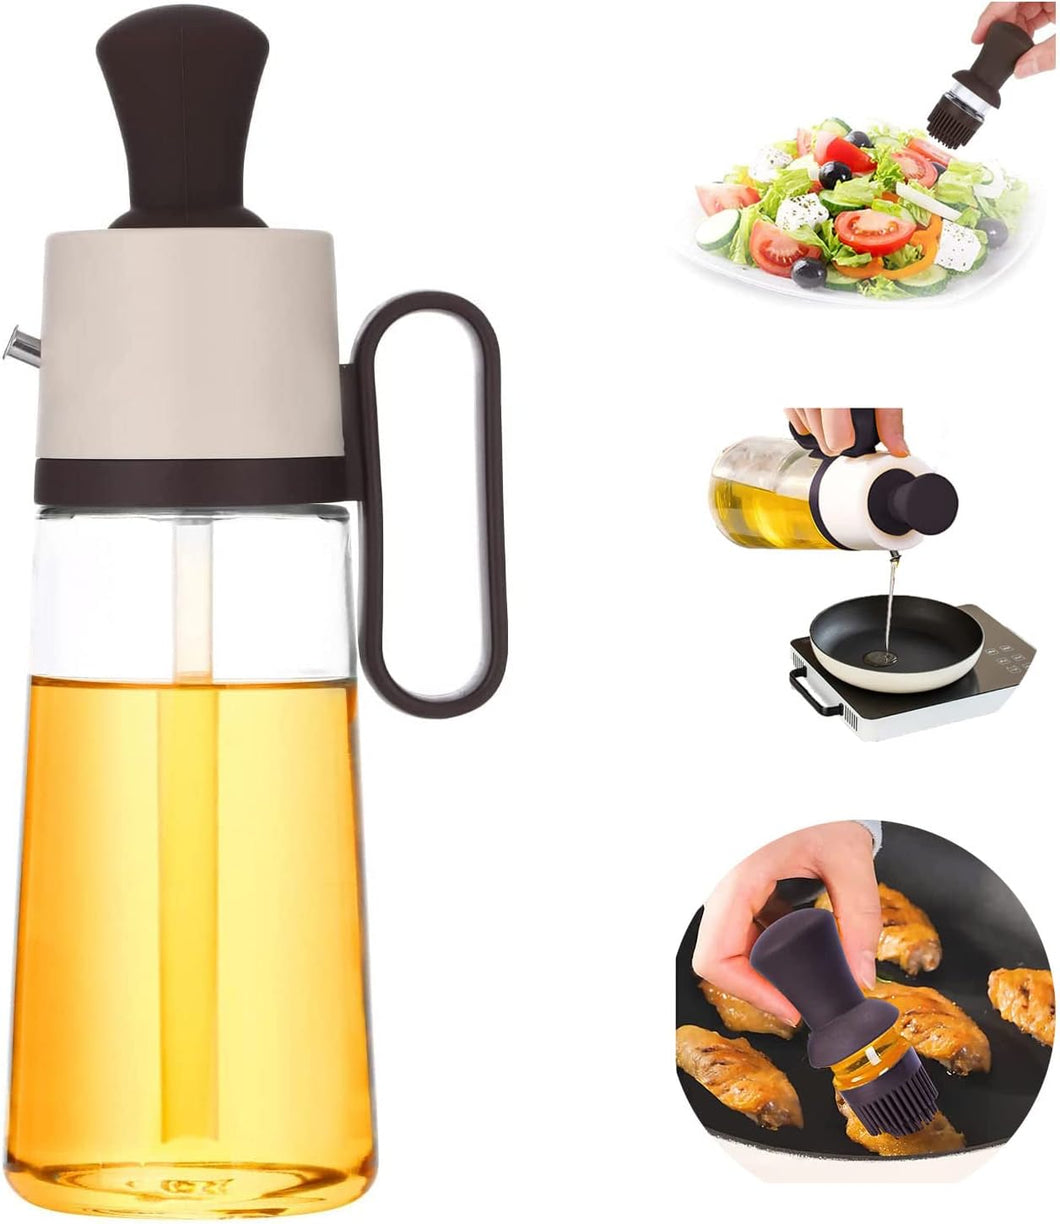 Cooking Glass Large Olive Oil Dispenser Bottle for Kitchen with Brush Pour Brush Squeeze Oil 3 in 1 Silicone Dropper Measuring Oil Dispenser for Cooking Fry Baking BBQ Mother's Day Gift